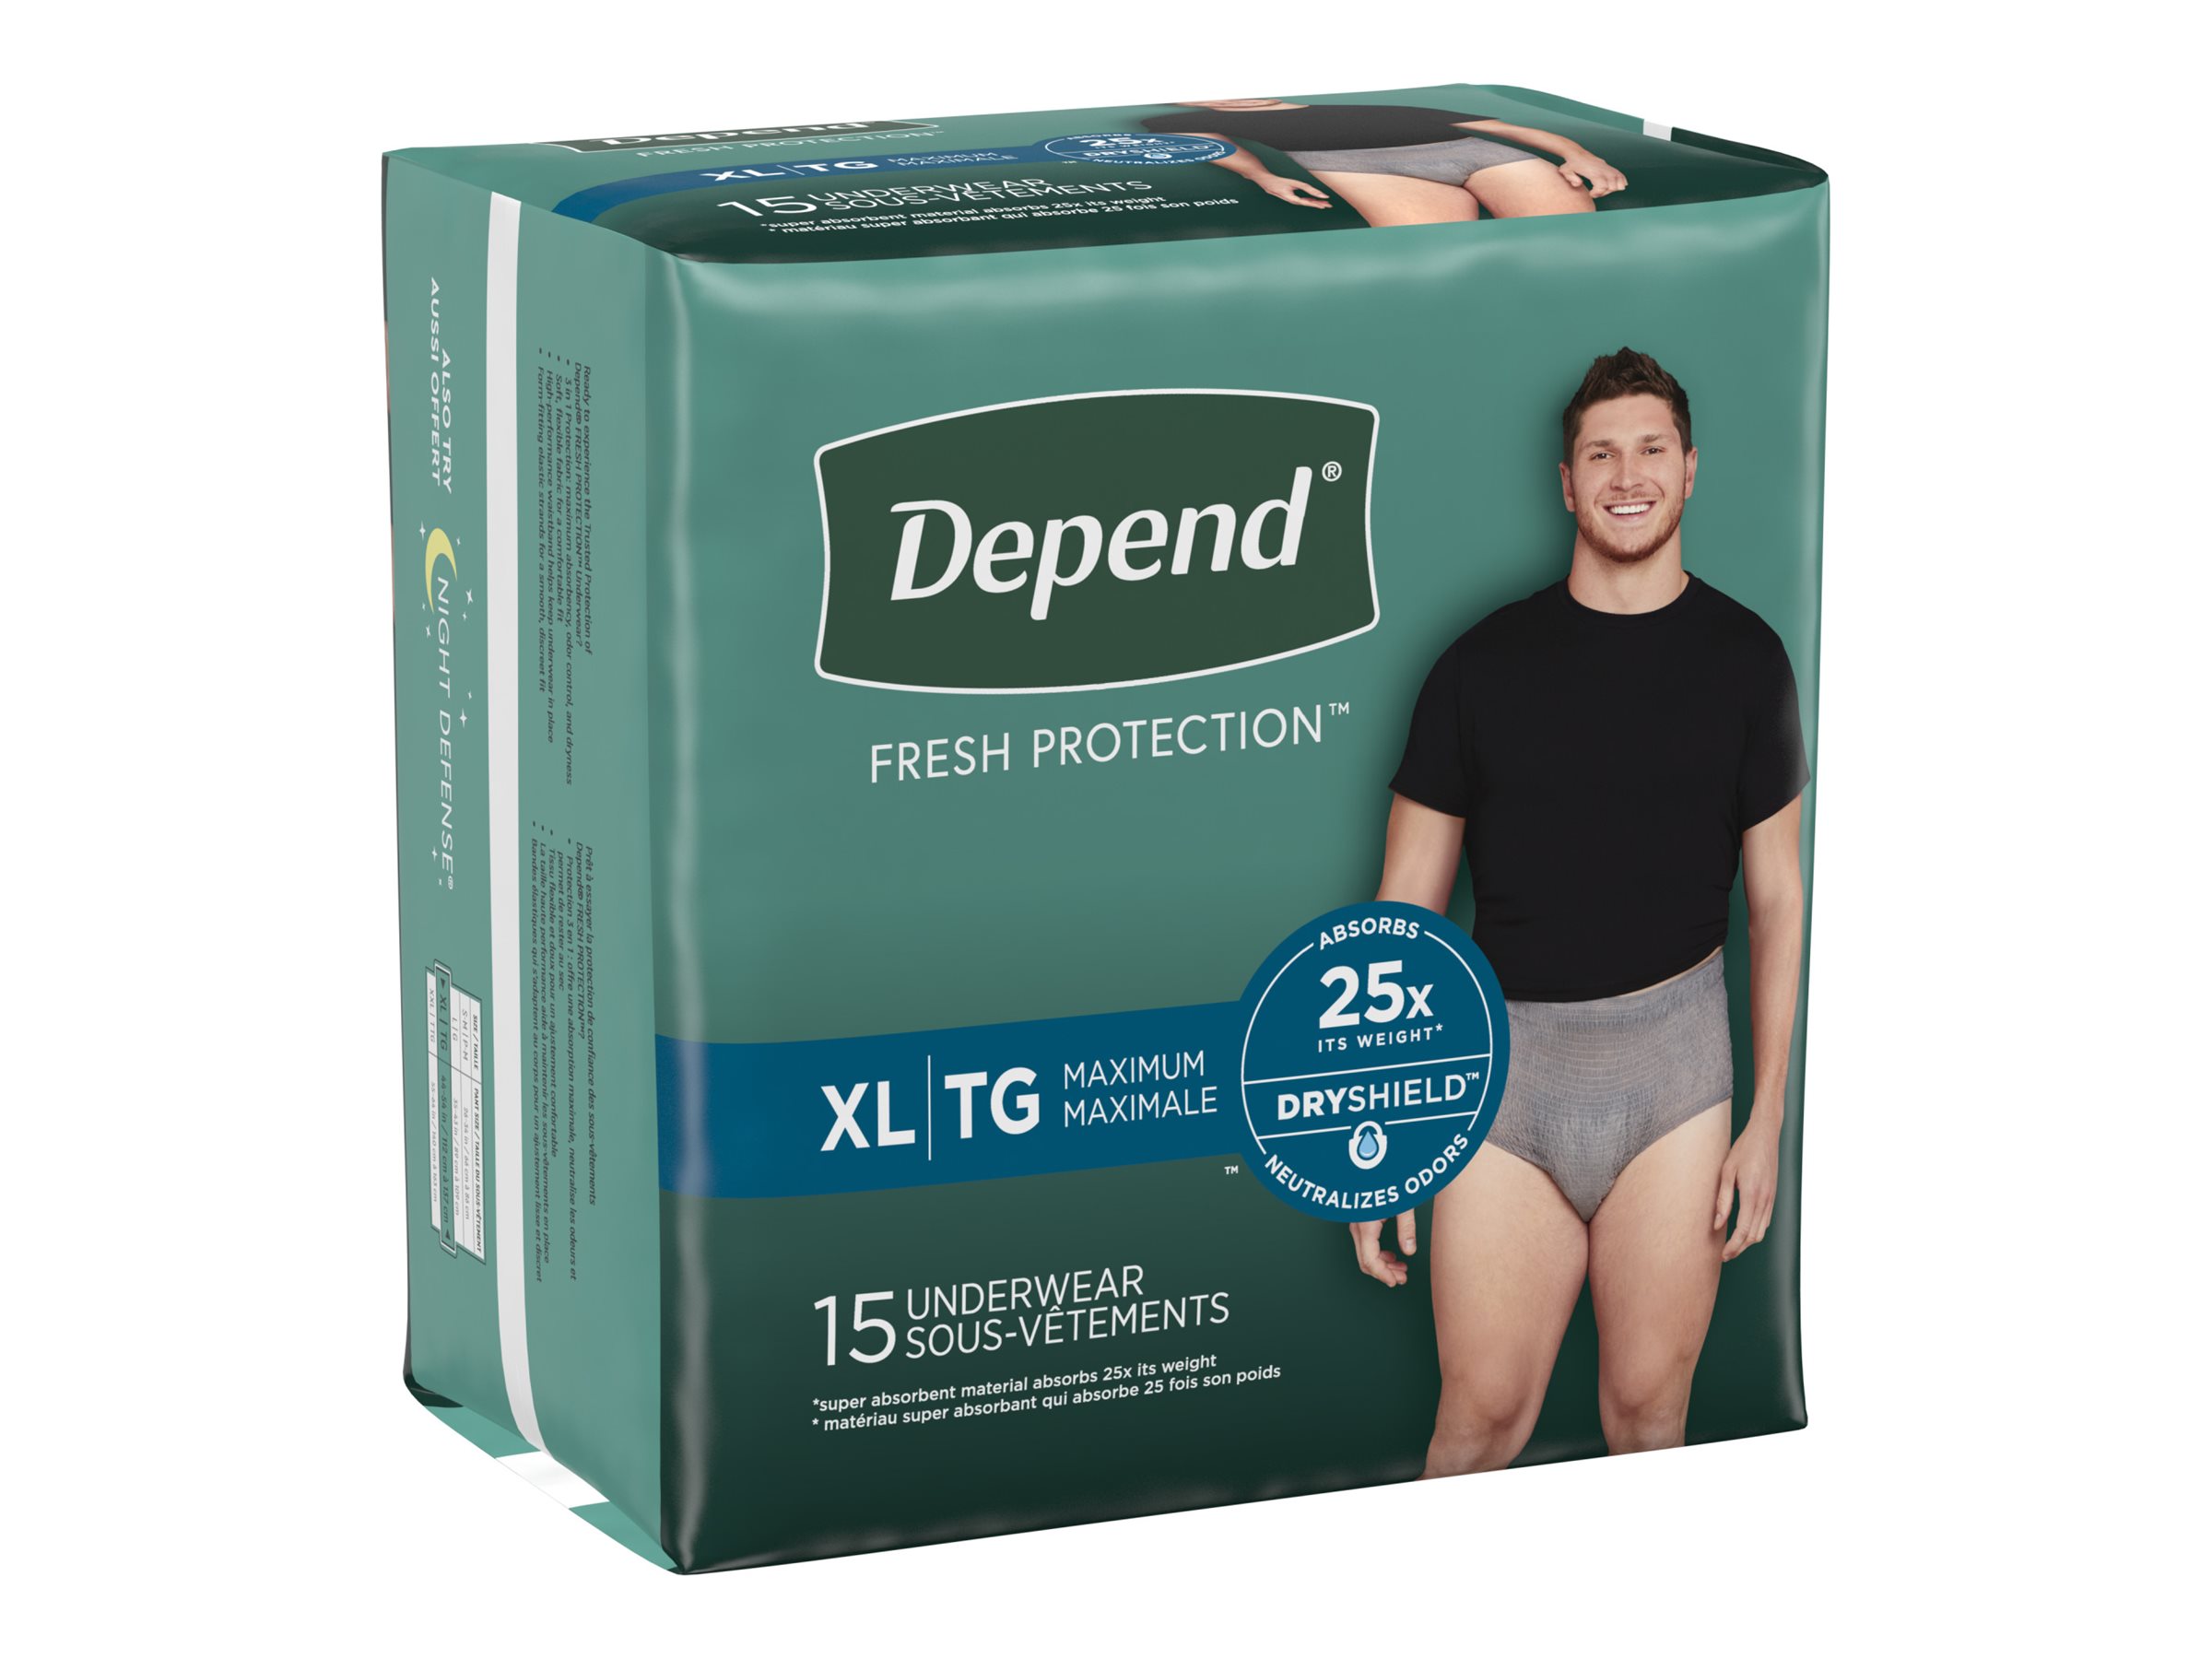 Depend Fresh Protection Adult Incontinence Underwear Maximum Absorbency  Extra-Large Grey Underwear, 26 count - King Soopers